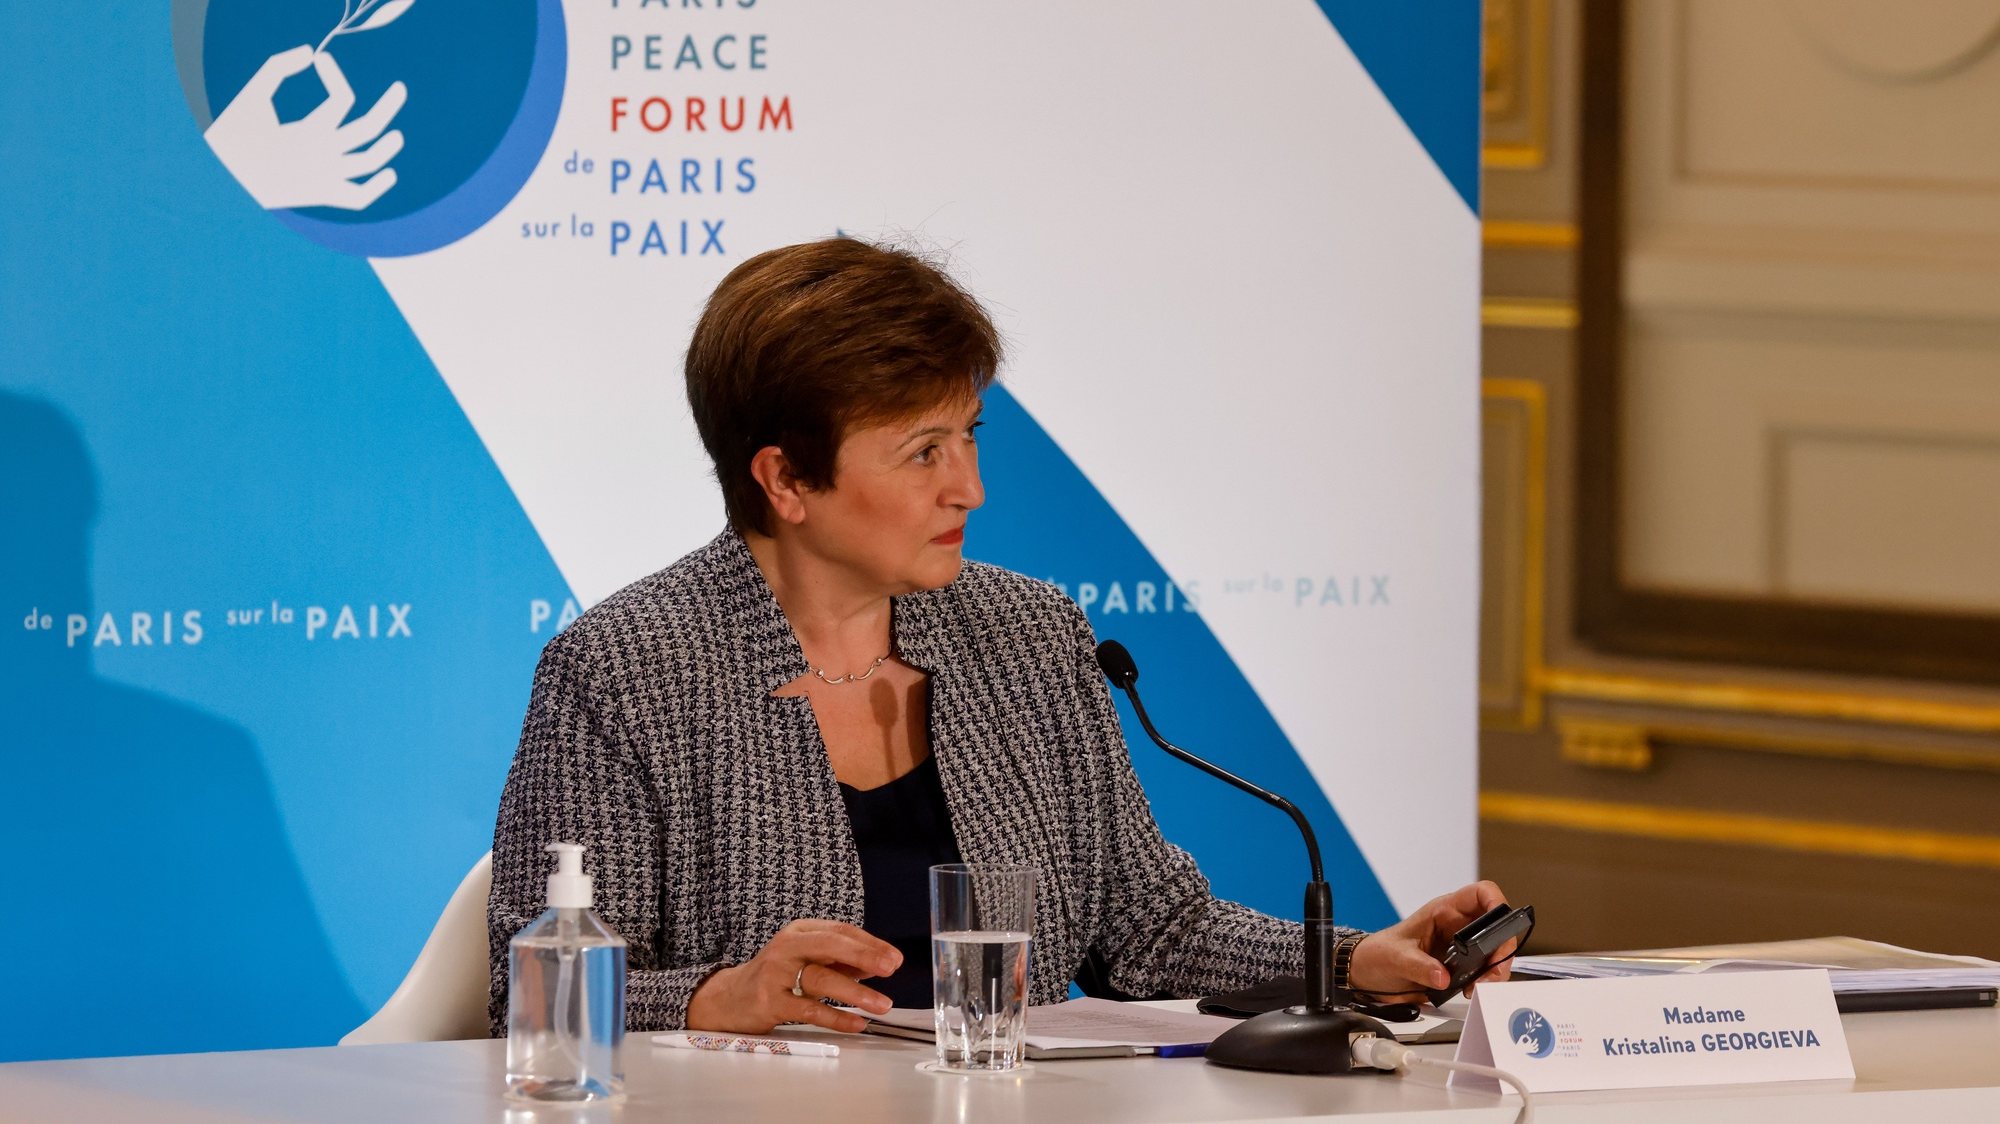 epa08815835 International Monetary Fund Managing Director Kristalina Georgieva attends The Paris Peace Forum at The Elysee Palace in Paris, France, 12 November 2020. Organisers of the French Paris Peace Forum say several countries and foundations are set to pledge more than 500 million US dollars for a global pool aimed at ensuring equitable access to coronavirus tests, treatment and vaccines for all nations.  EPA/LUDOVIC MARIN / POOL  MAXPPP OUT